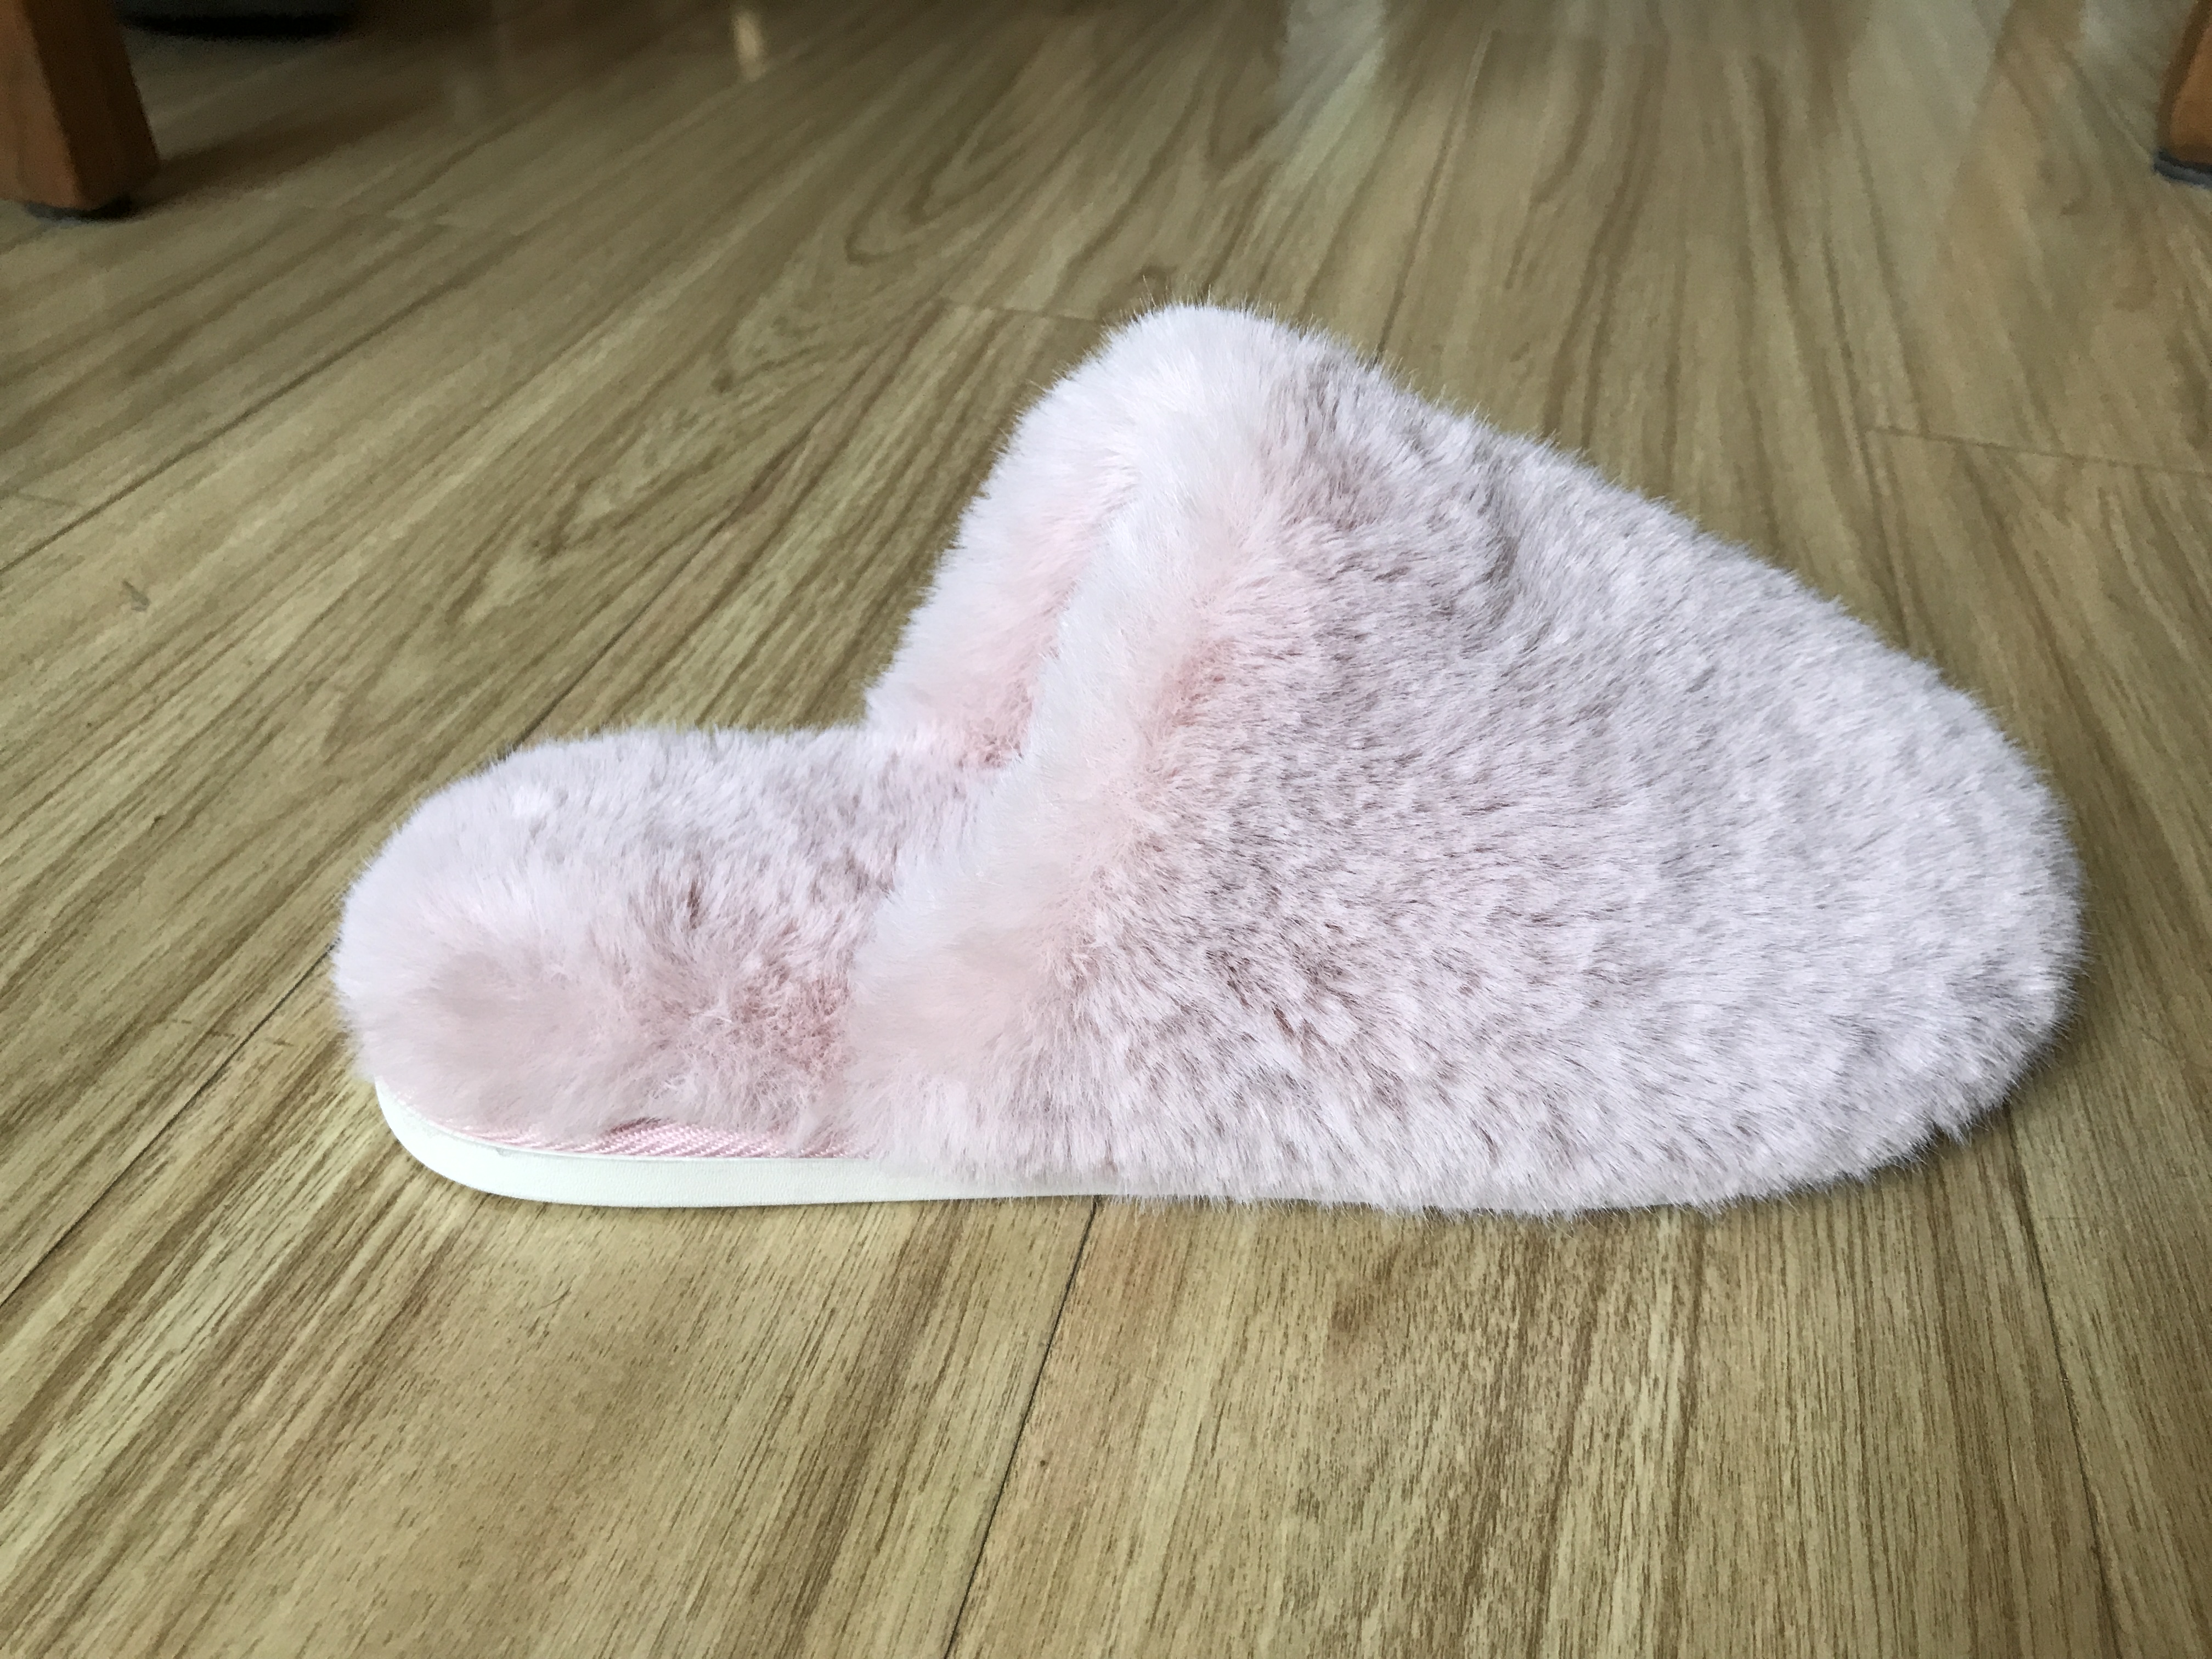 Women's Comfy Plush Slippers with Warm Plush Faux Fur Lining